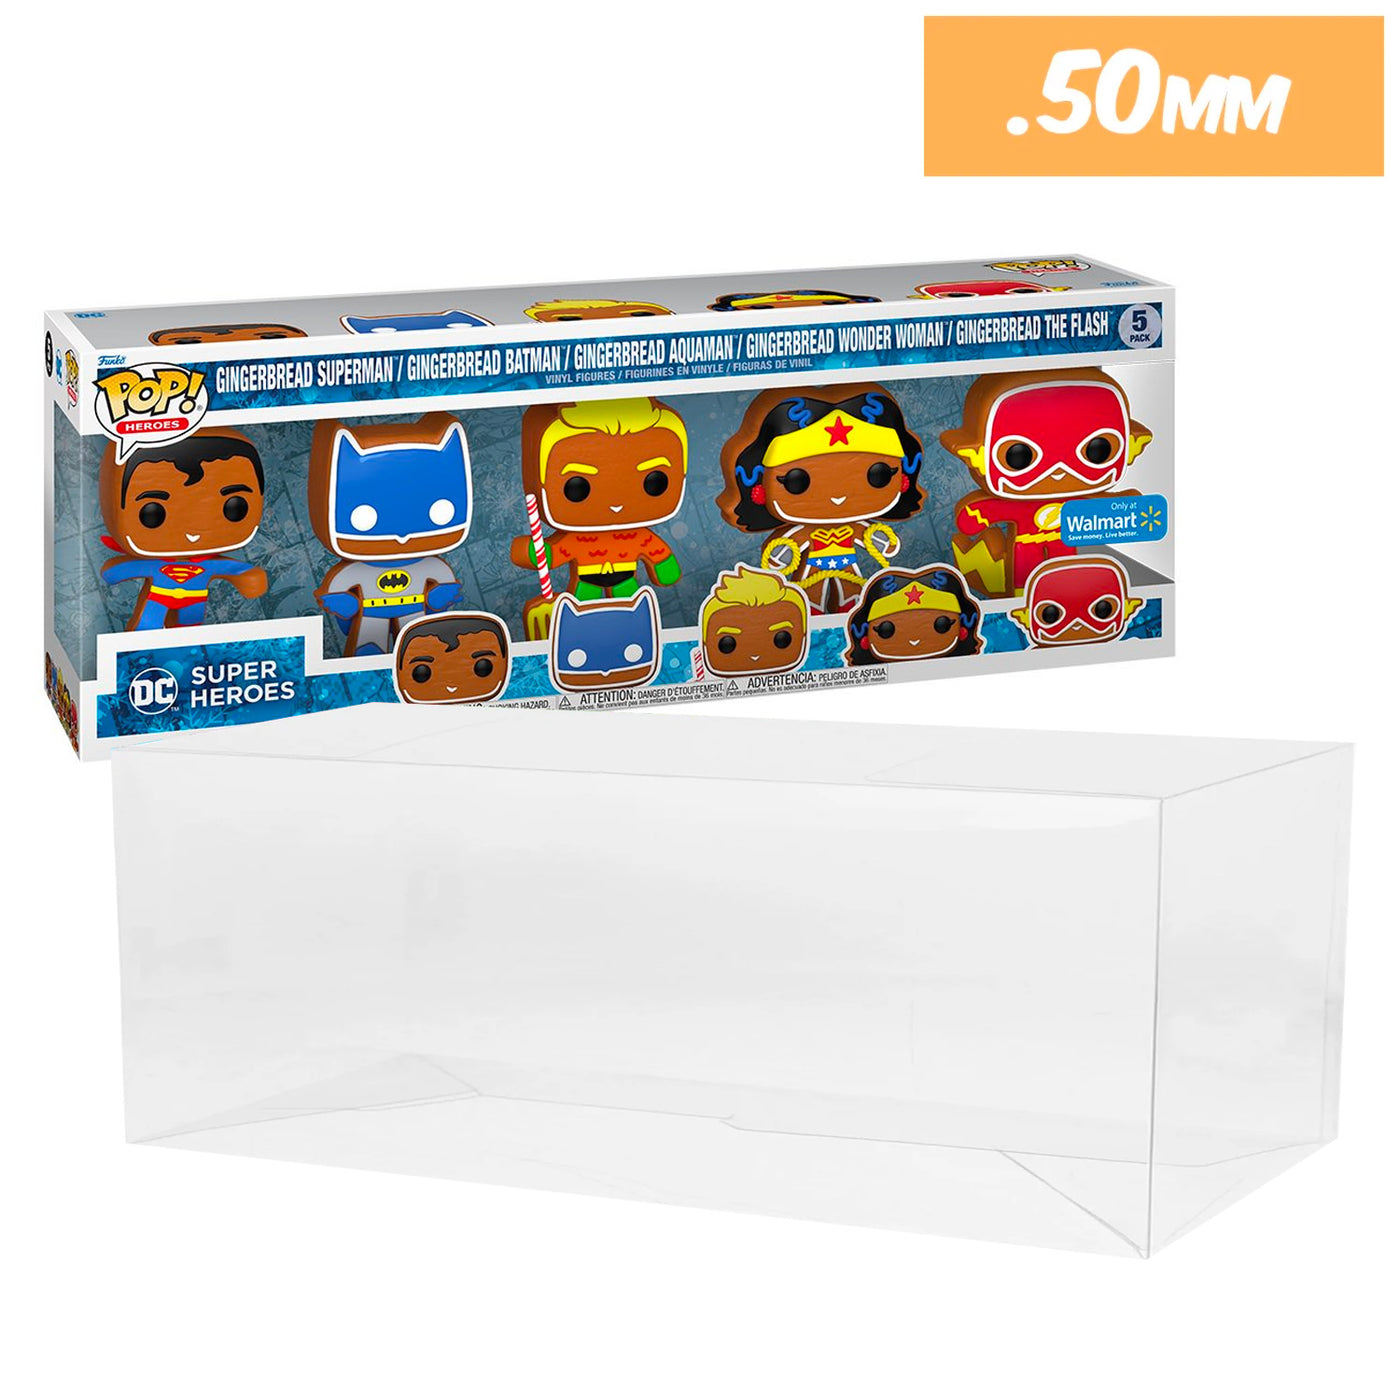 dc gingerbread 5 pack best funko pop protectors thick strong uv scratch flat top stack vinyl display geek plastic shield vaulted eco armor fits collect protect display case kollector protector